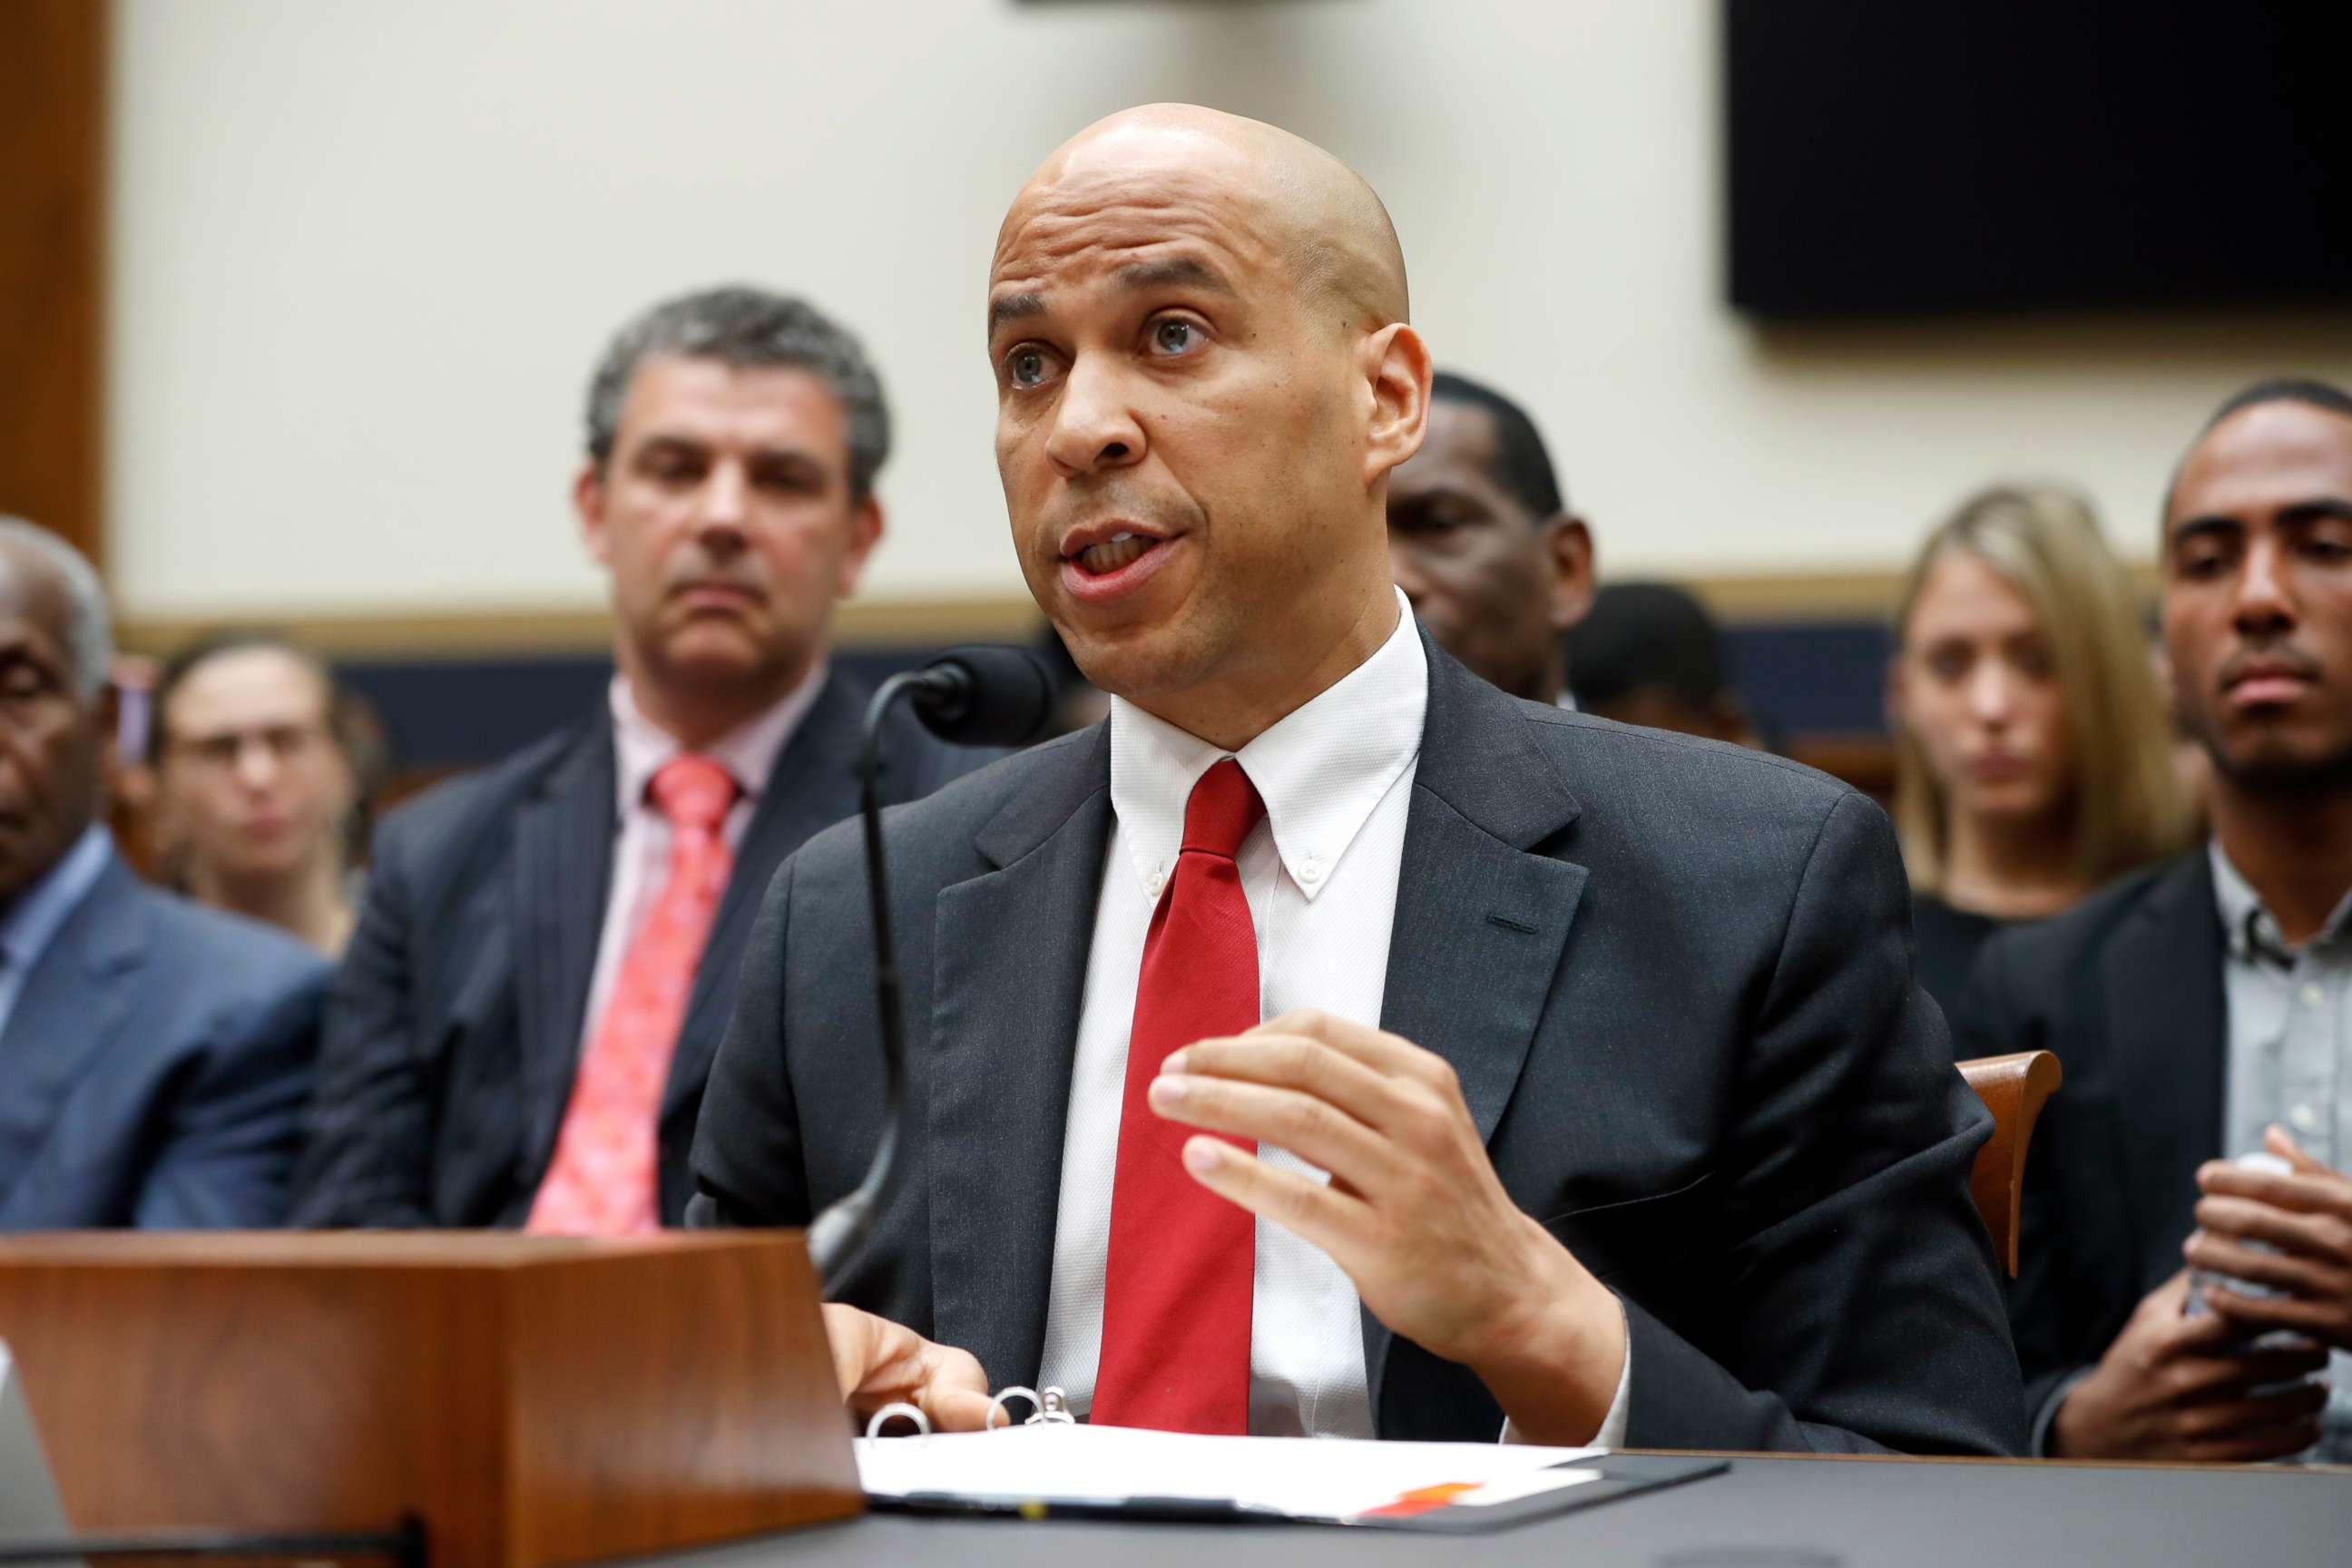 PHOTO: Sen. Cory Booker testifies about reparation for the descendants of slaves during a hearing before the House Judiciary Subcommittee on the Constitution, Civil Rights and Civil Liberties, at the Capitol in Washington, June 19, 2019.